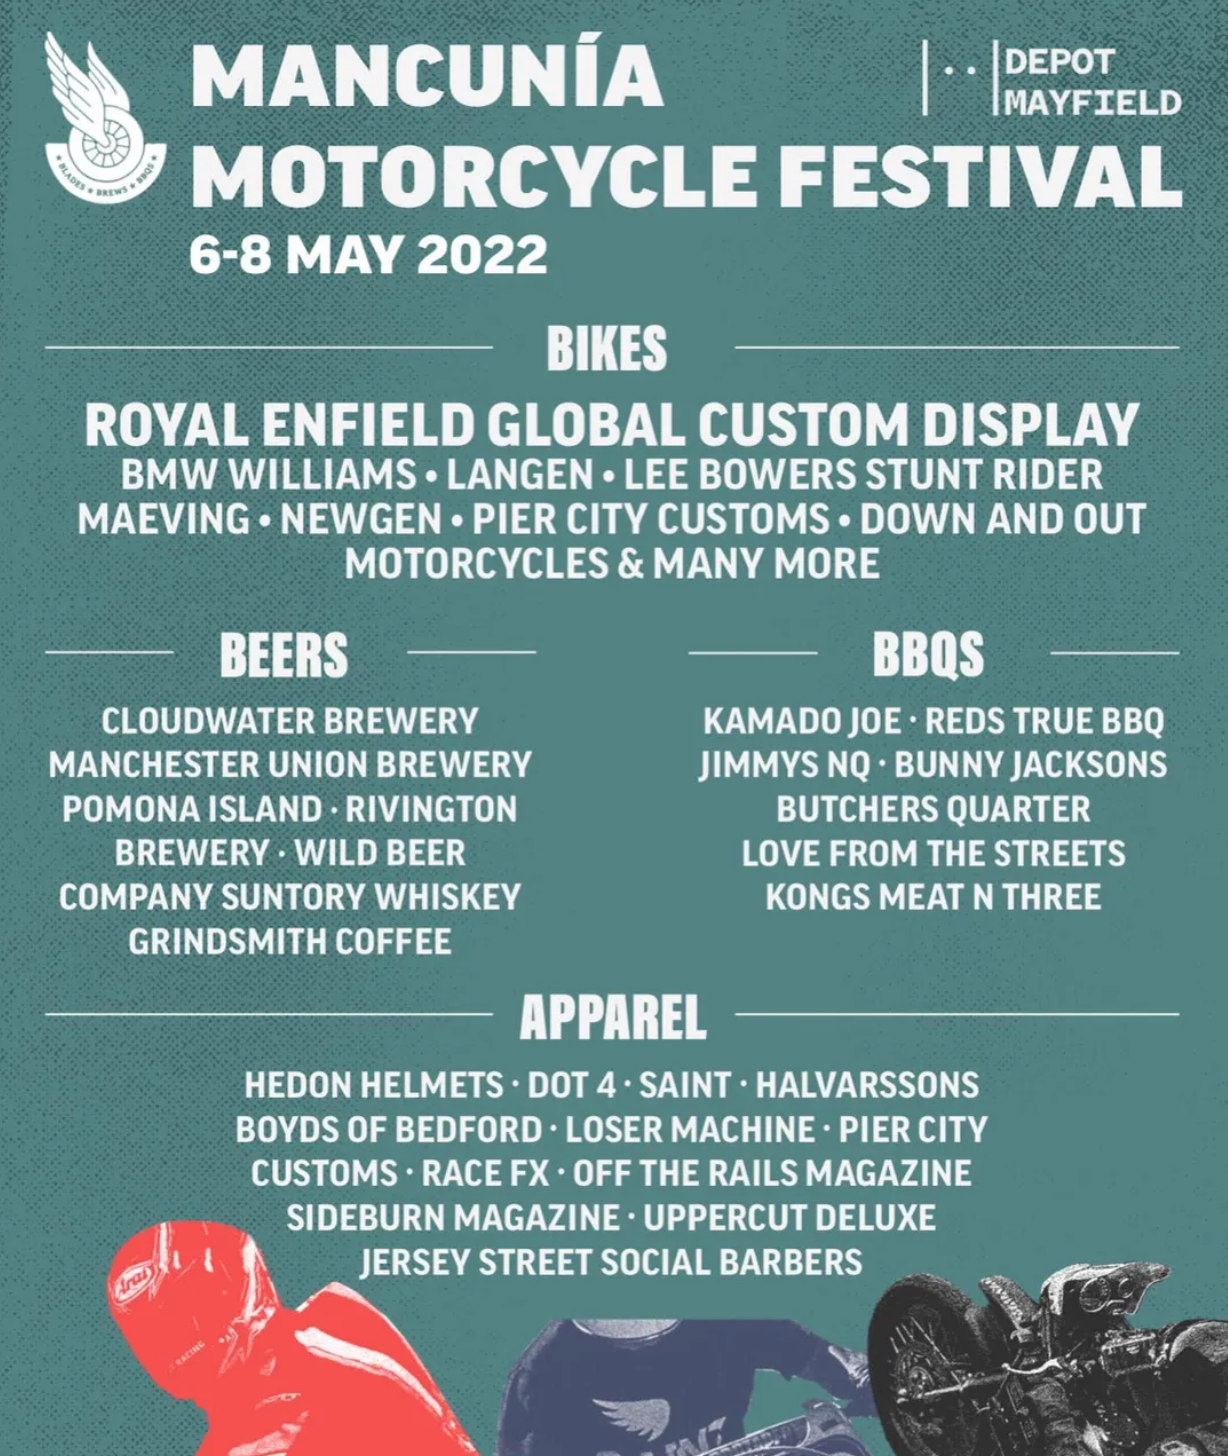 Tickets for festival full of motorcycles, street food, craft beer, and more in Manchester now on sale, The Manc